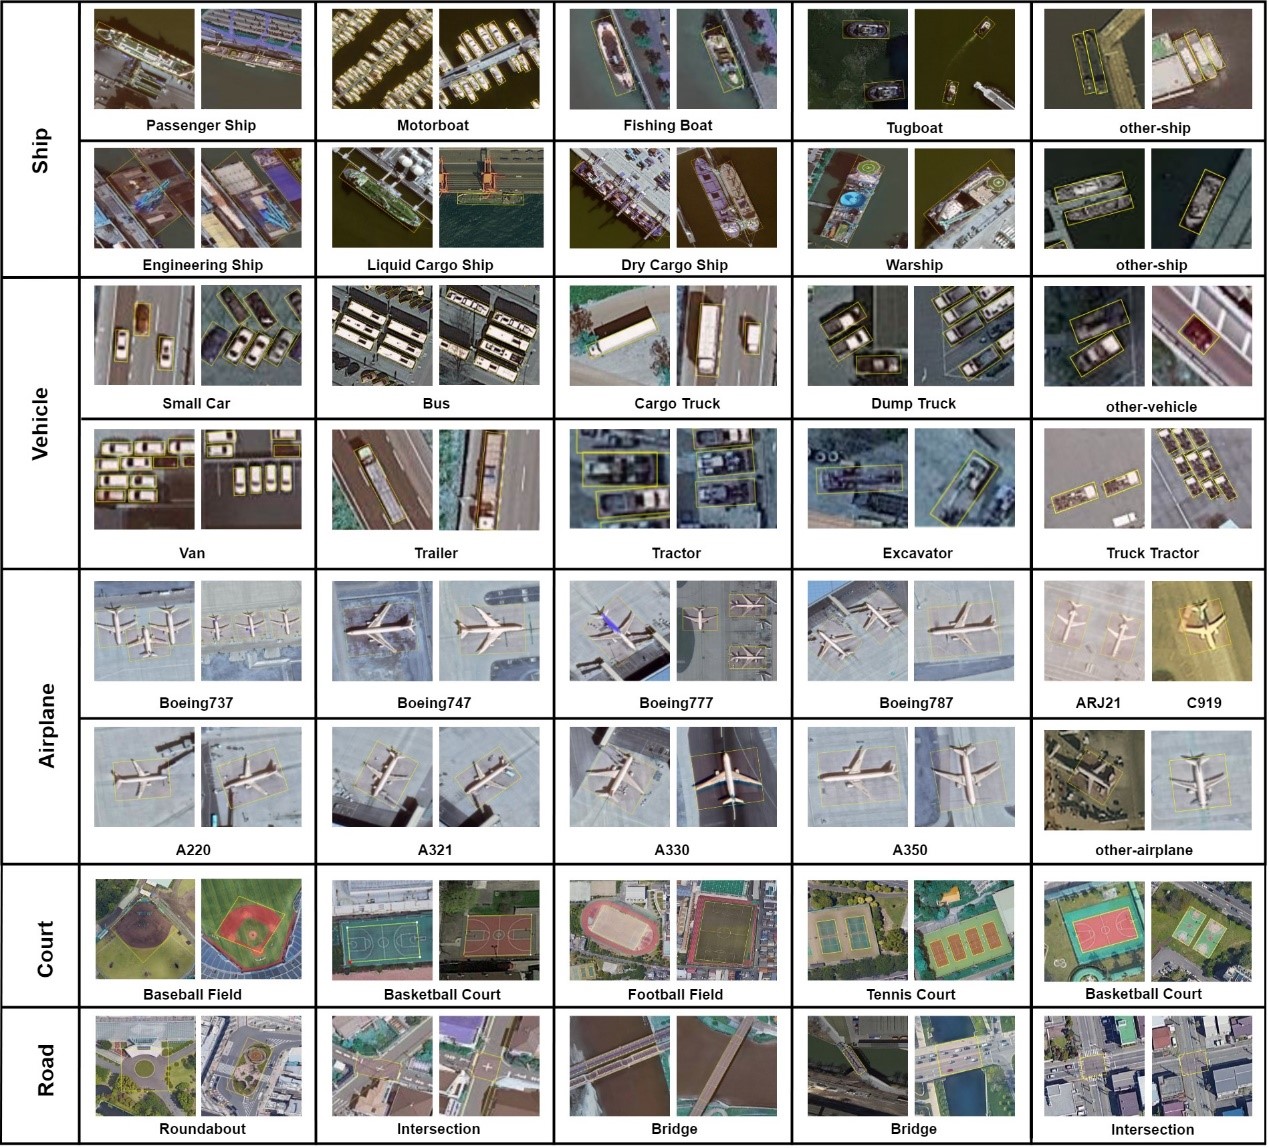 China Releases Benchmark Dataset for Millions of Fine-grained Object Recognition in High-Resolution Remote Sensing Imagery